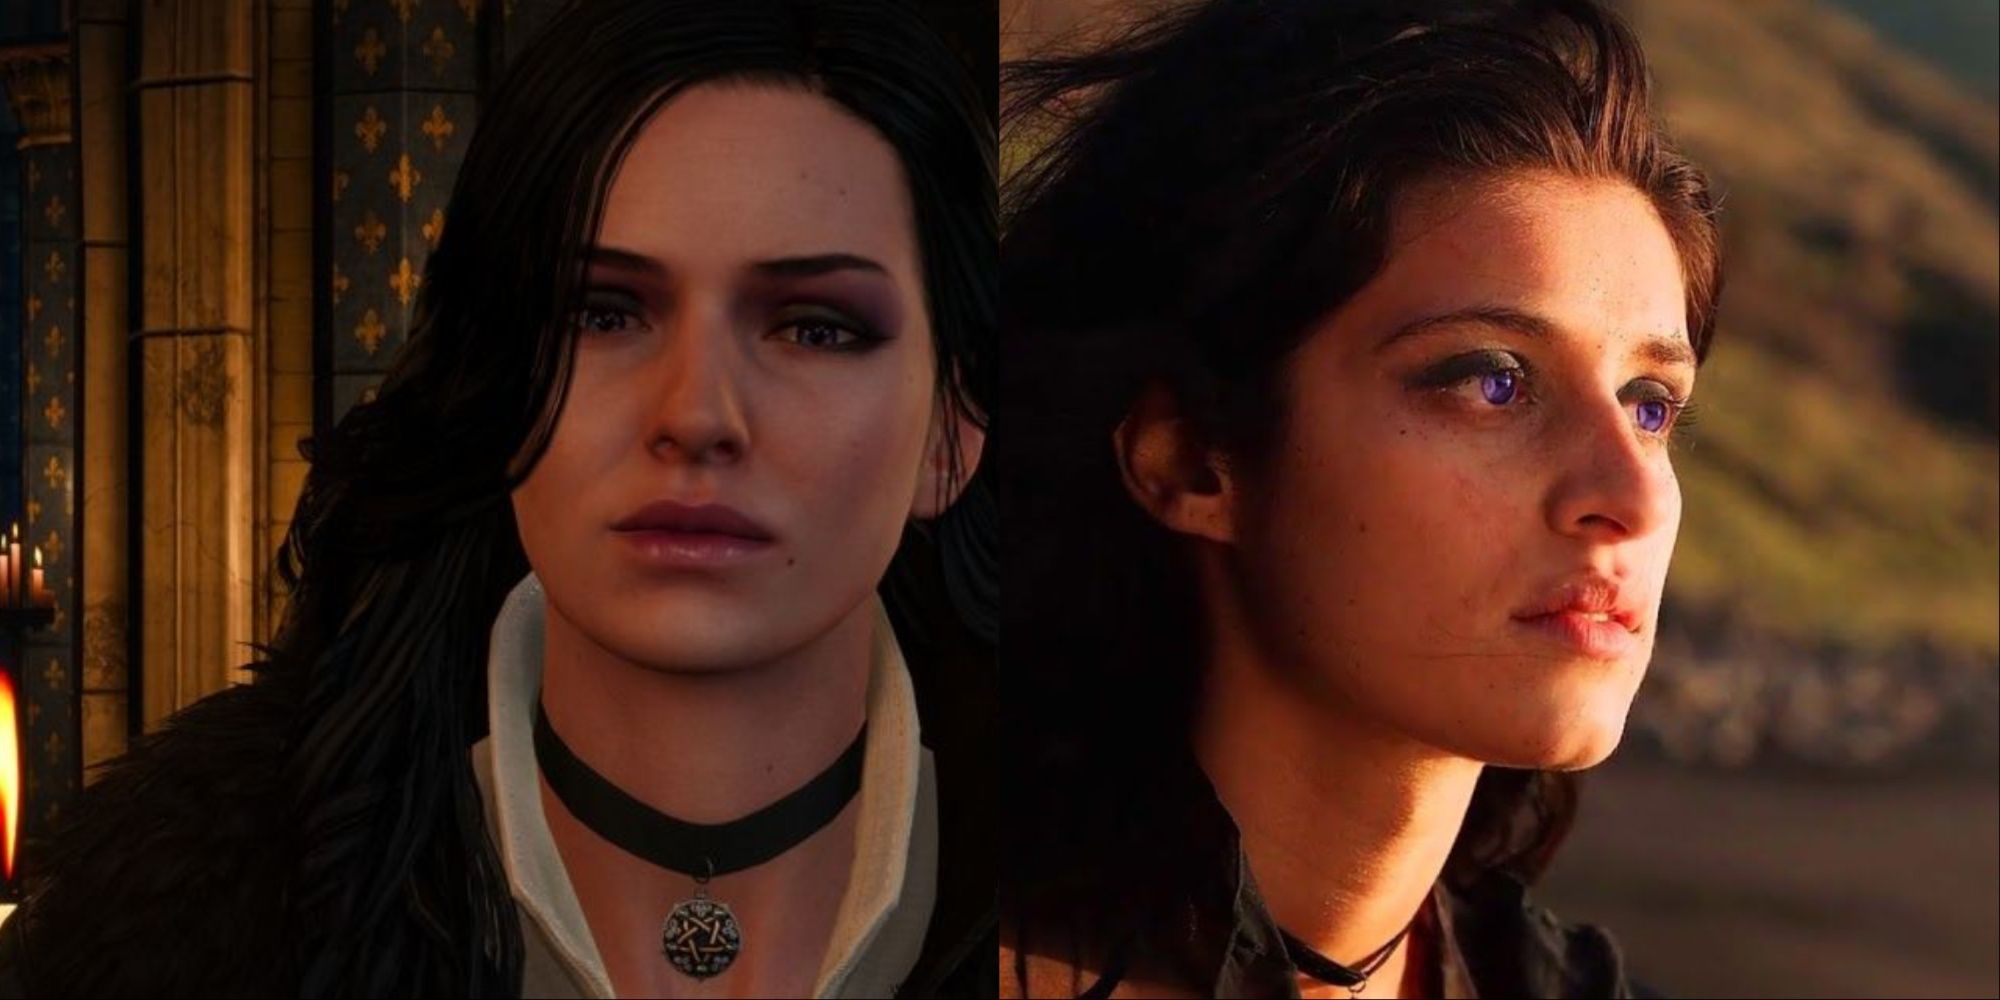 The Witcher Yennefer Quotes Featured Split Image Of Yennefer From The Witcher 3 and Yennefer From The Netflix Series